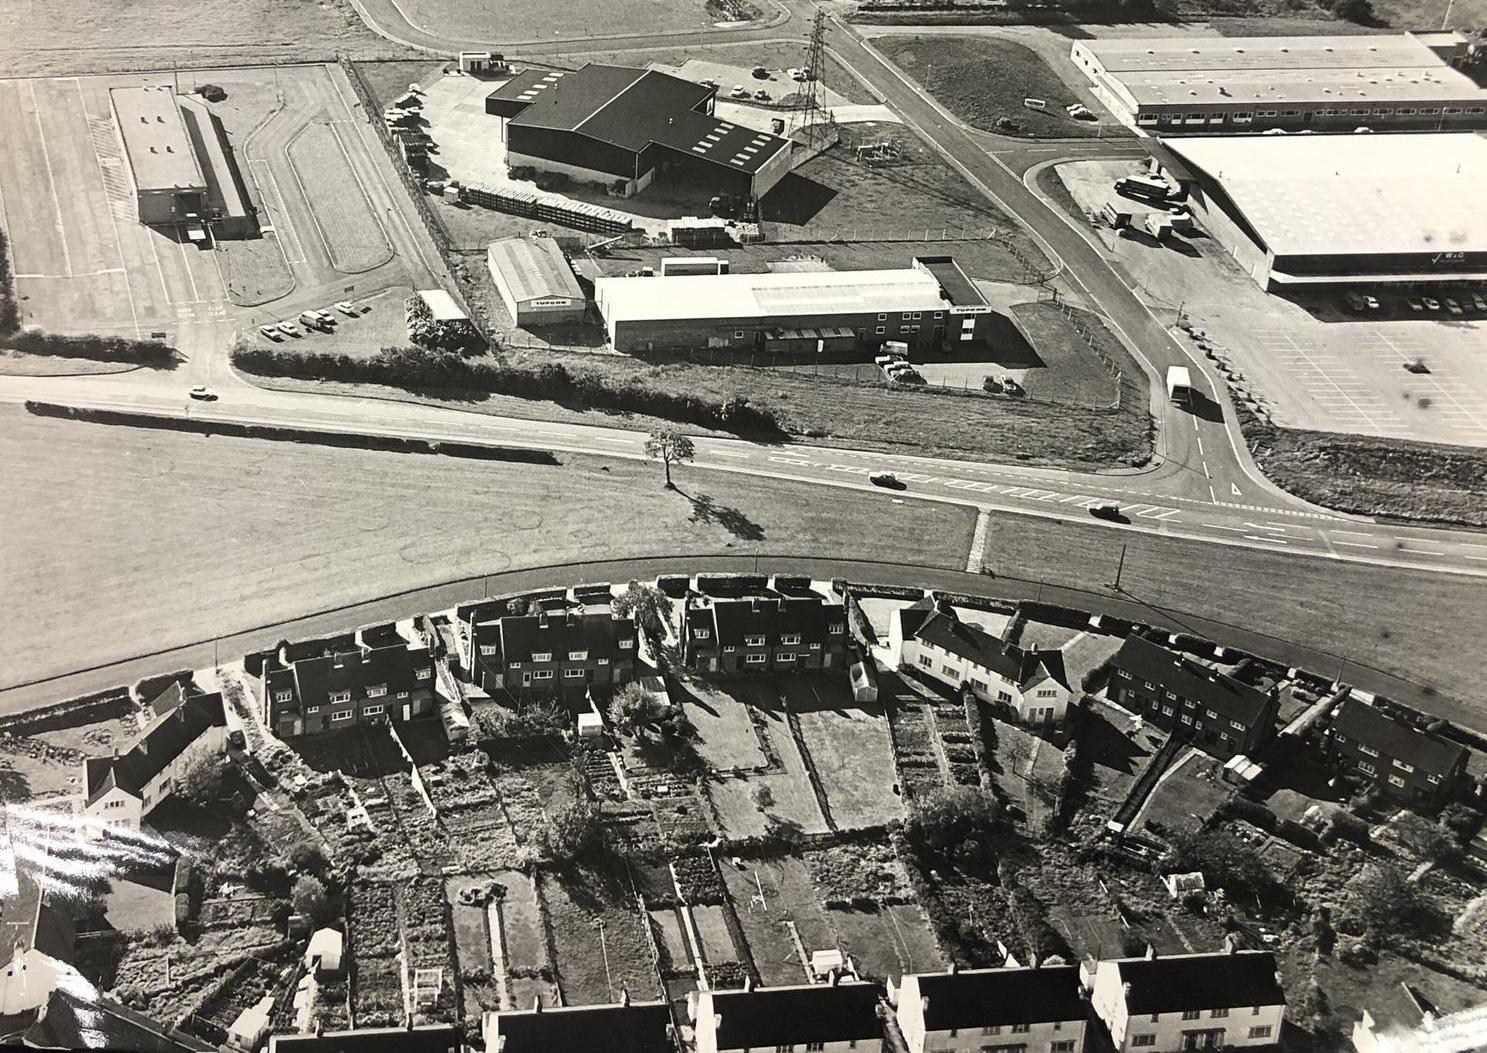 In this aerial photo you can see the start of Scarborough Business Park opposite Loders Green in Eastfield. The DVLA test centre can be seen on the left hand side and the building that is now Bookers Wholesale is on the right.